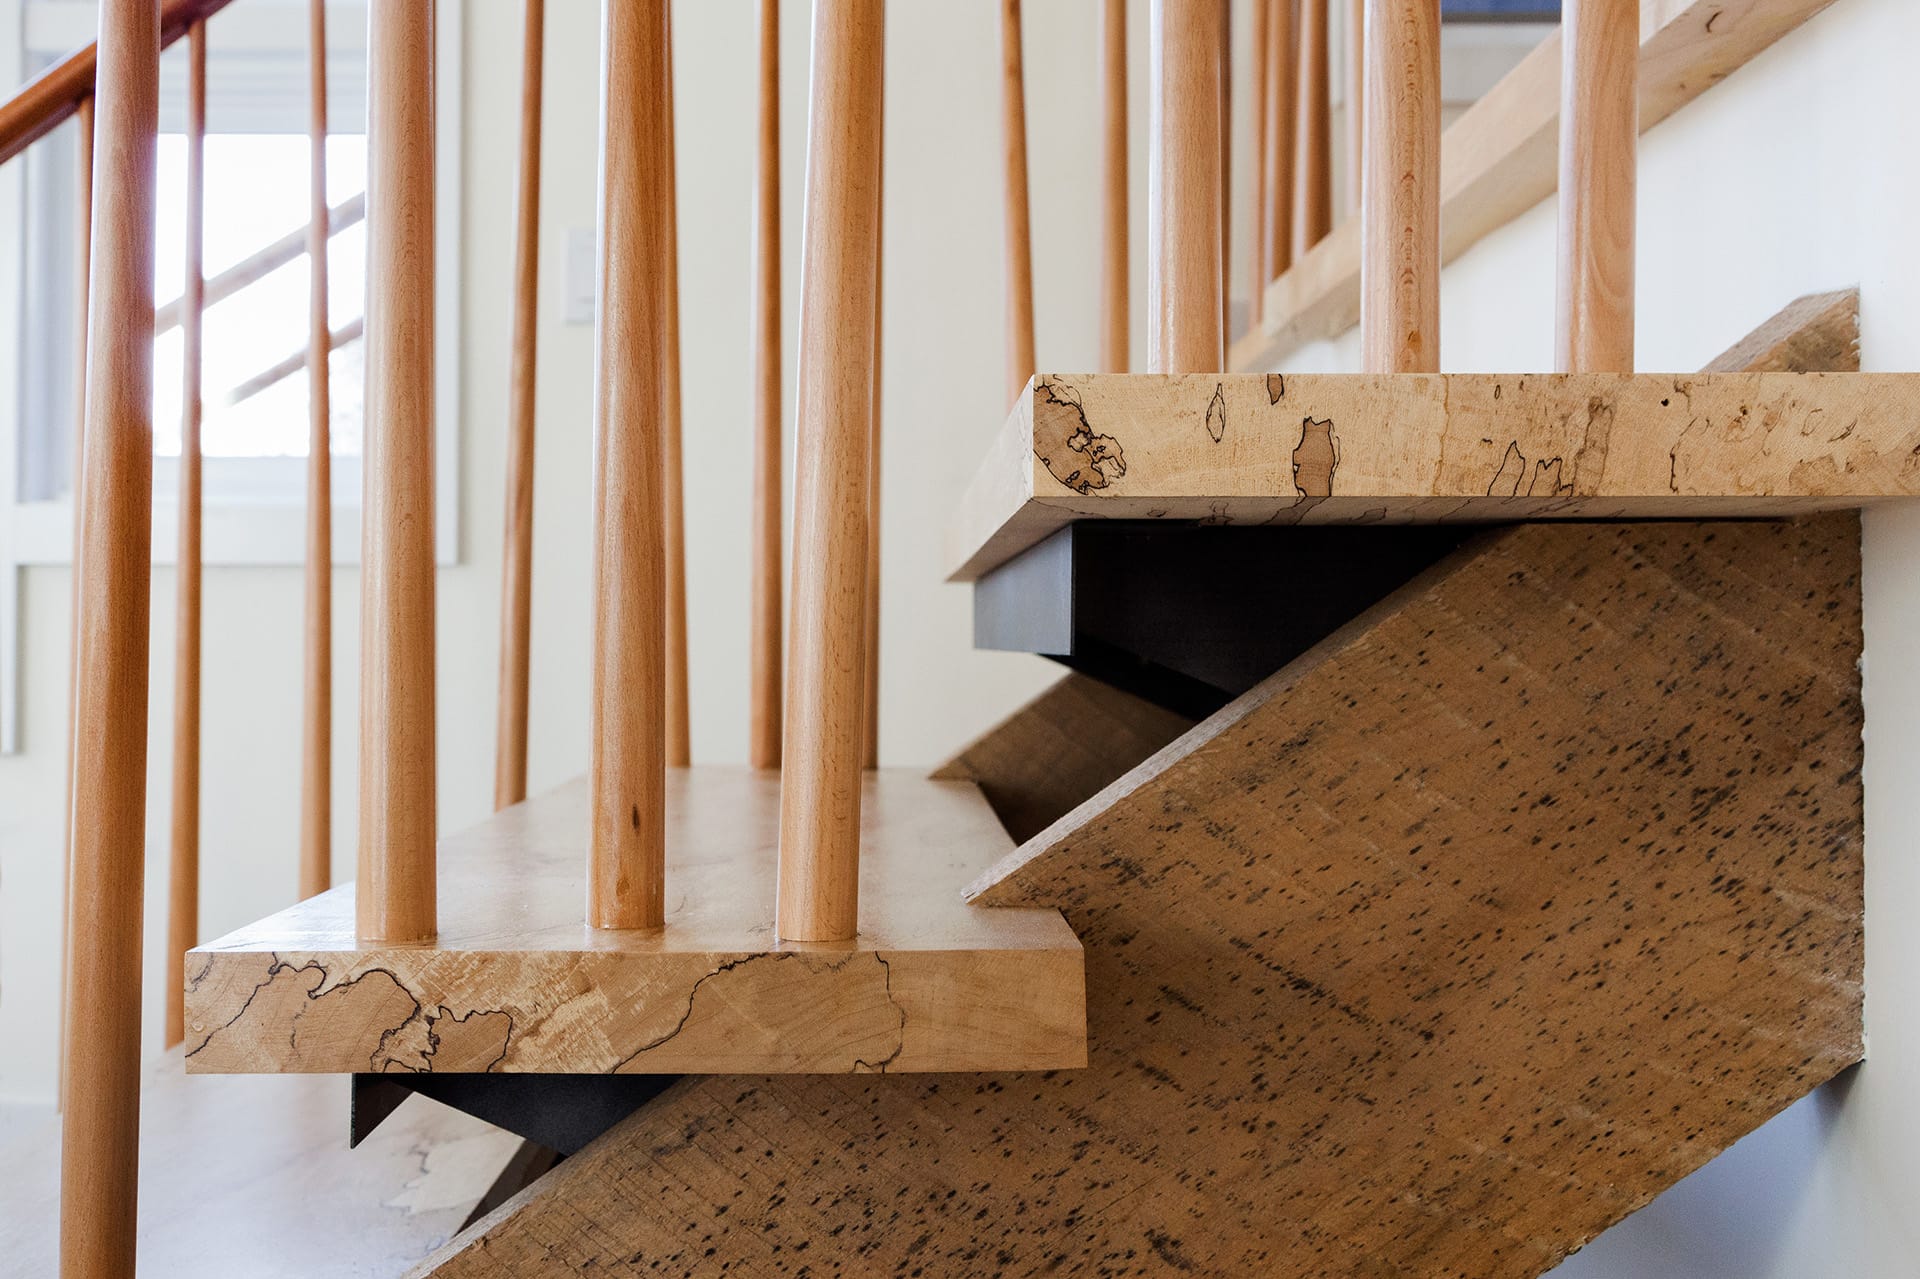 Detail of an entry staircase custom made from reclaimed wood.